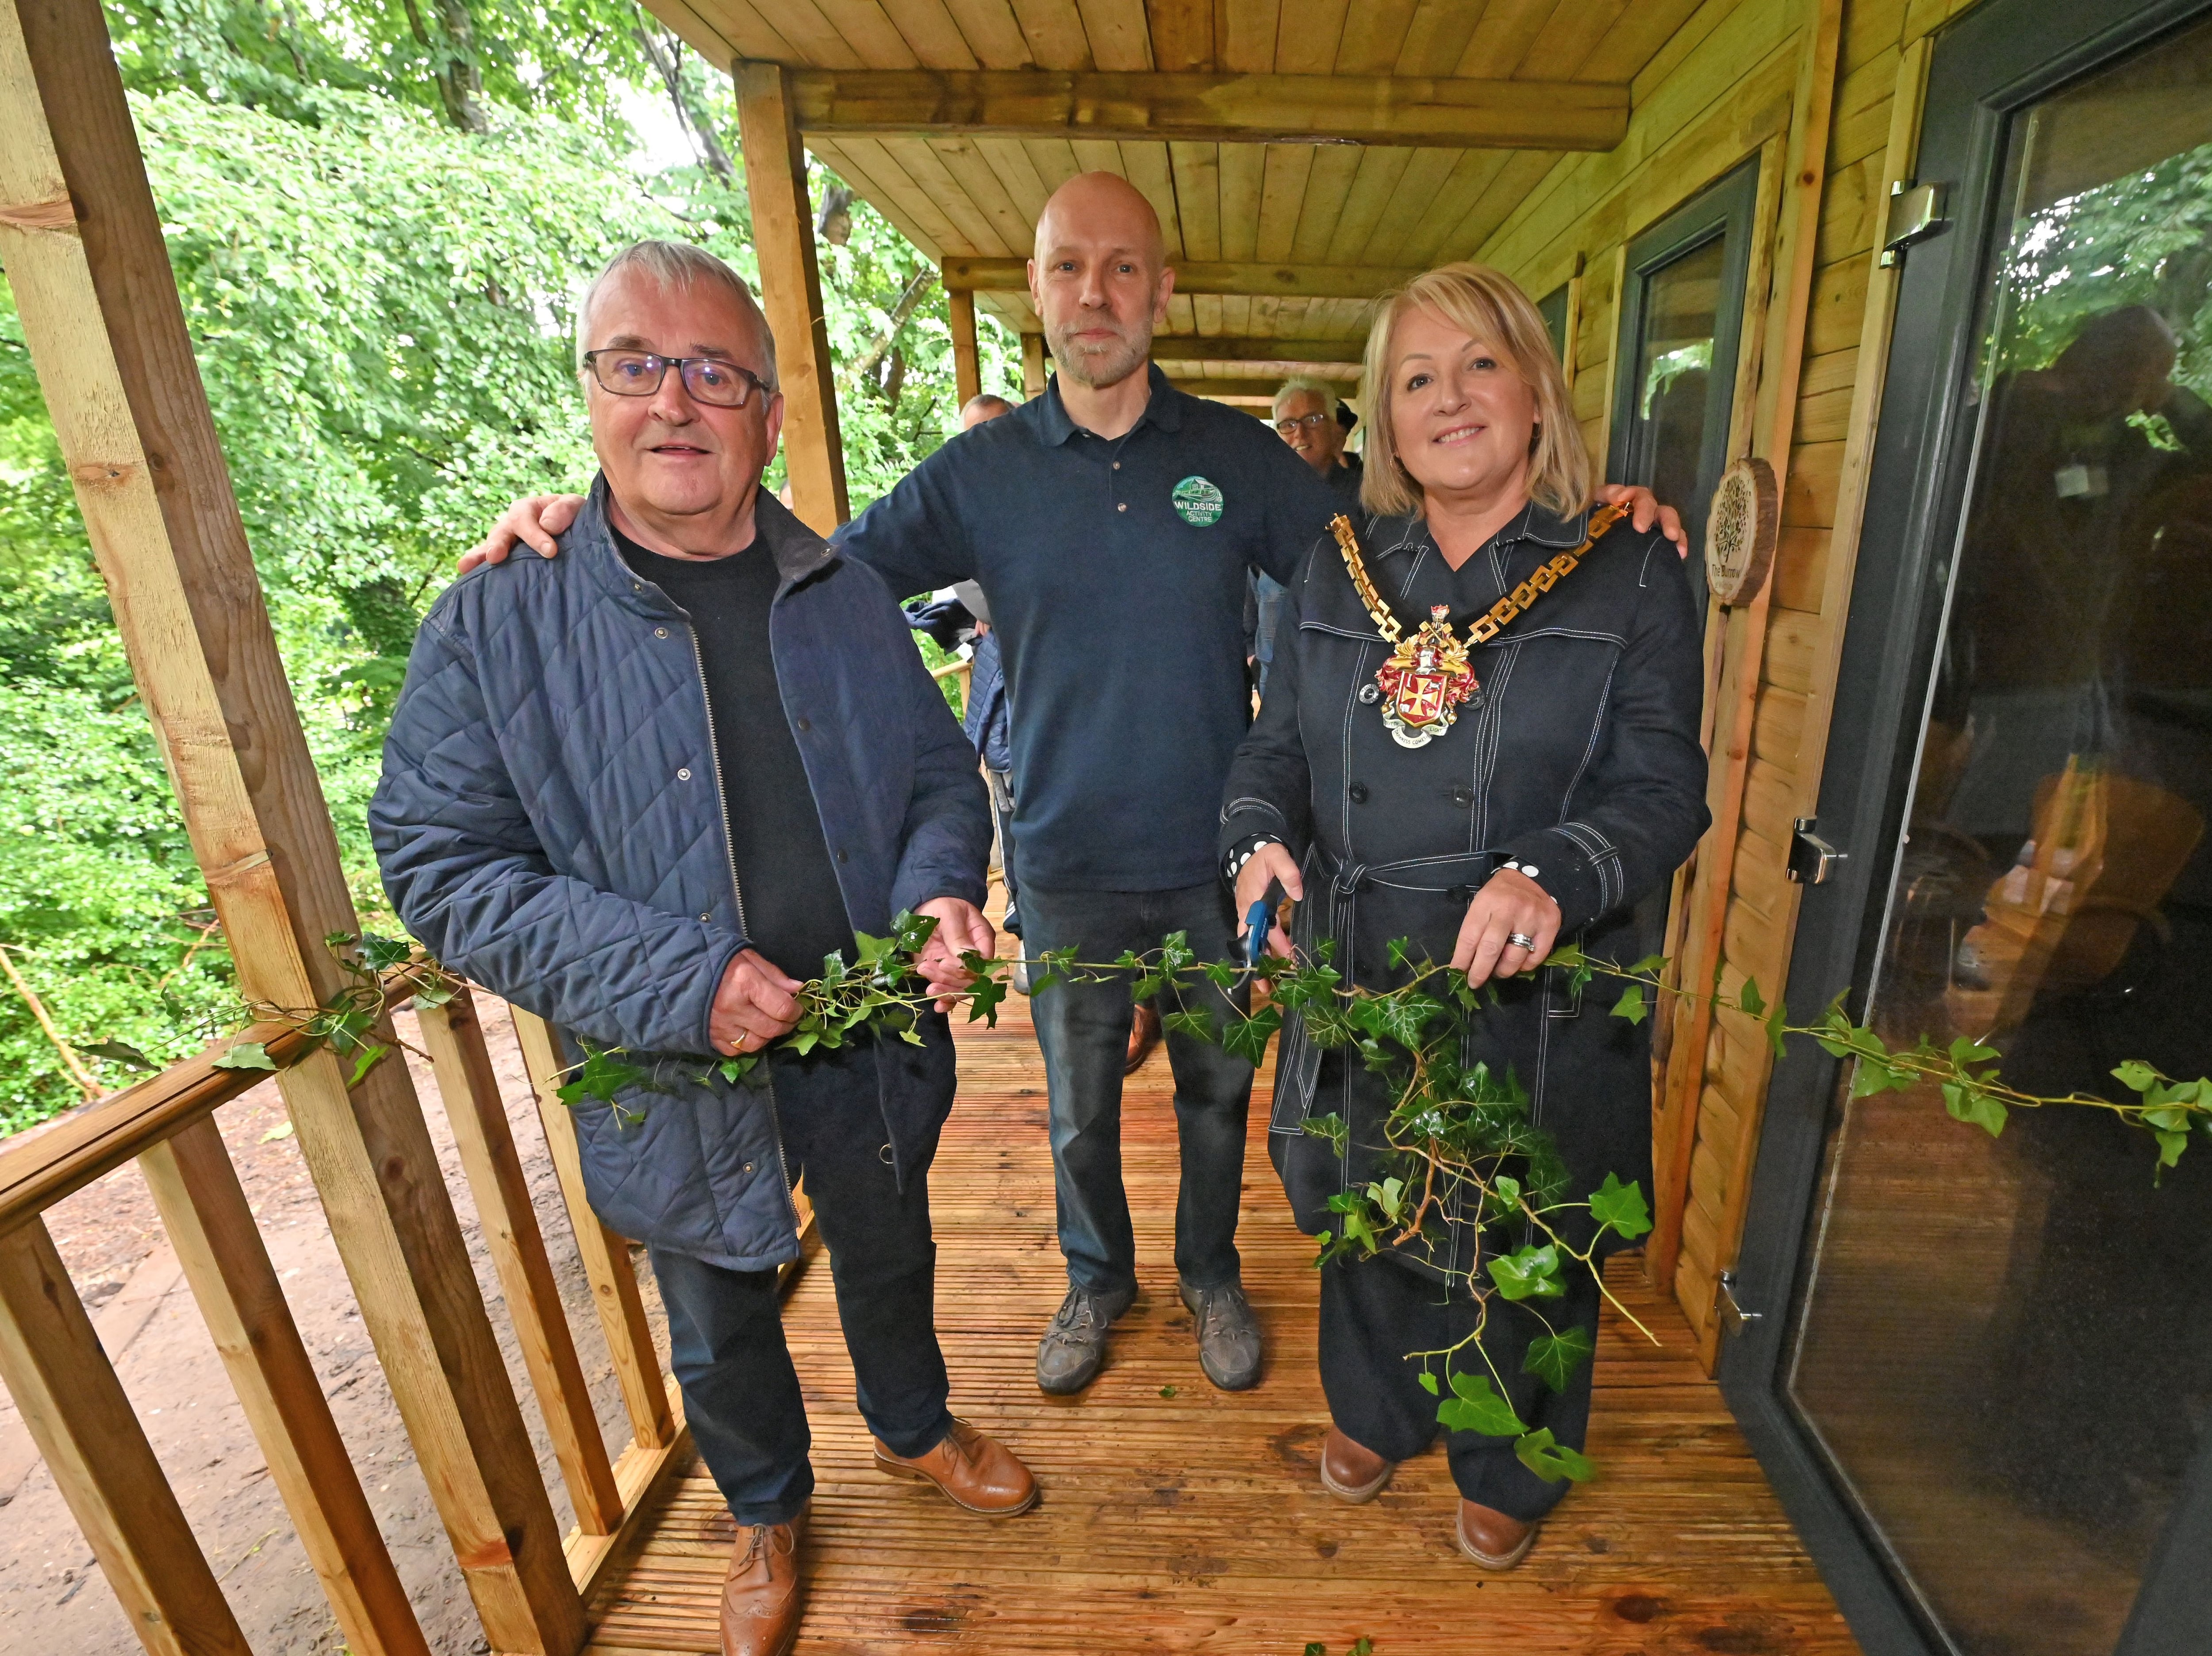 Mayor opens new woodland nature learning centre in heart of city